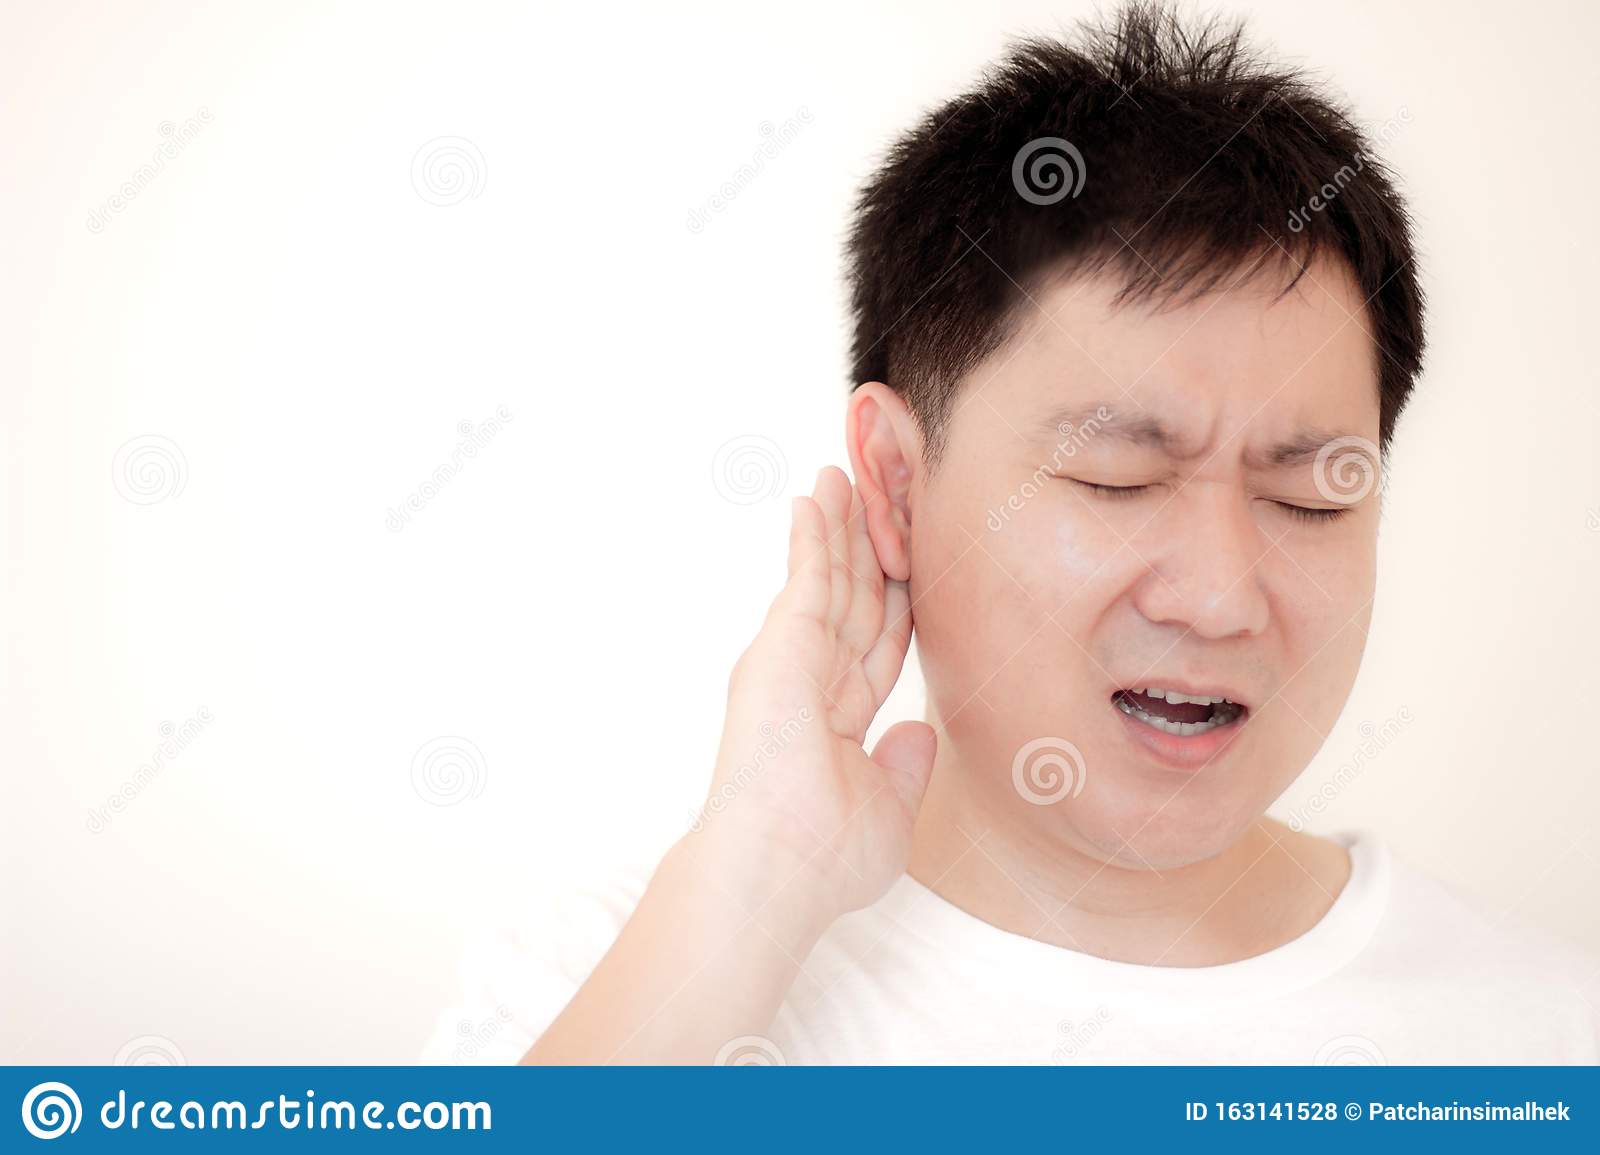 Men Suffering From Severe Ear Pain Are Caused By An Infection Causing ...